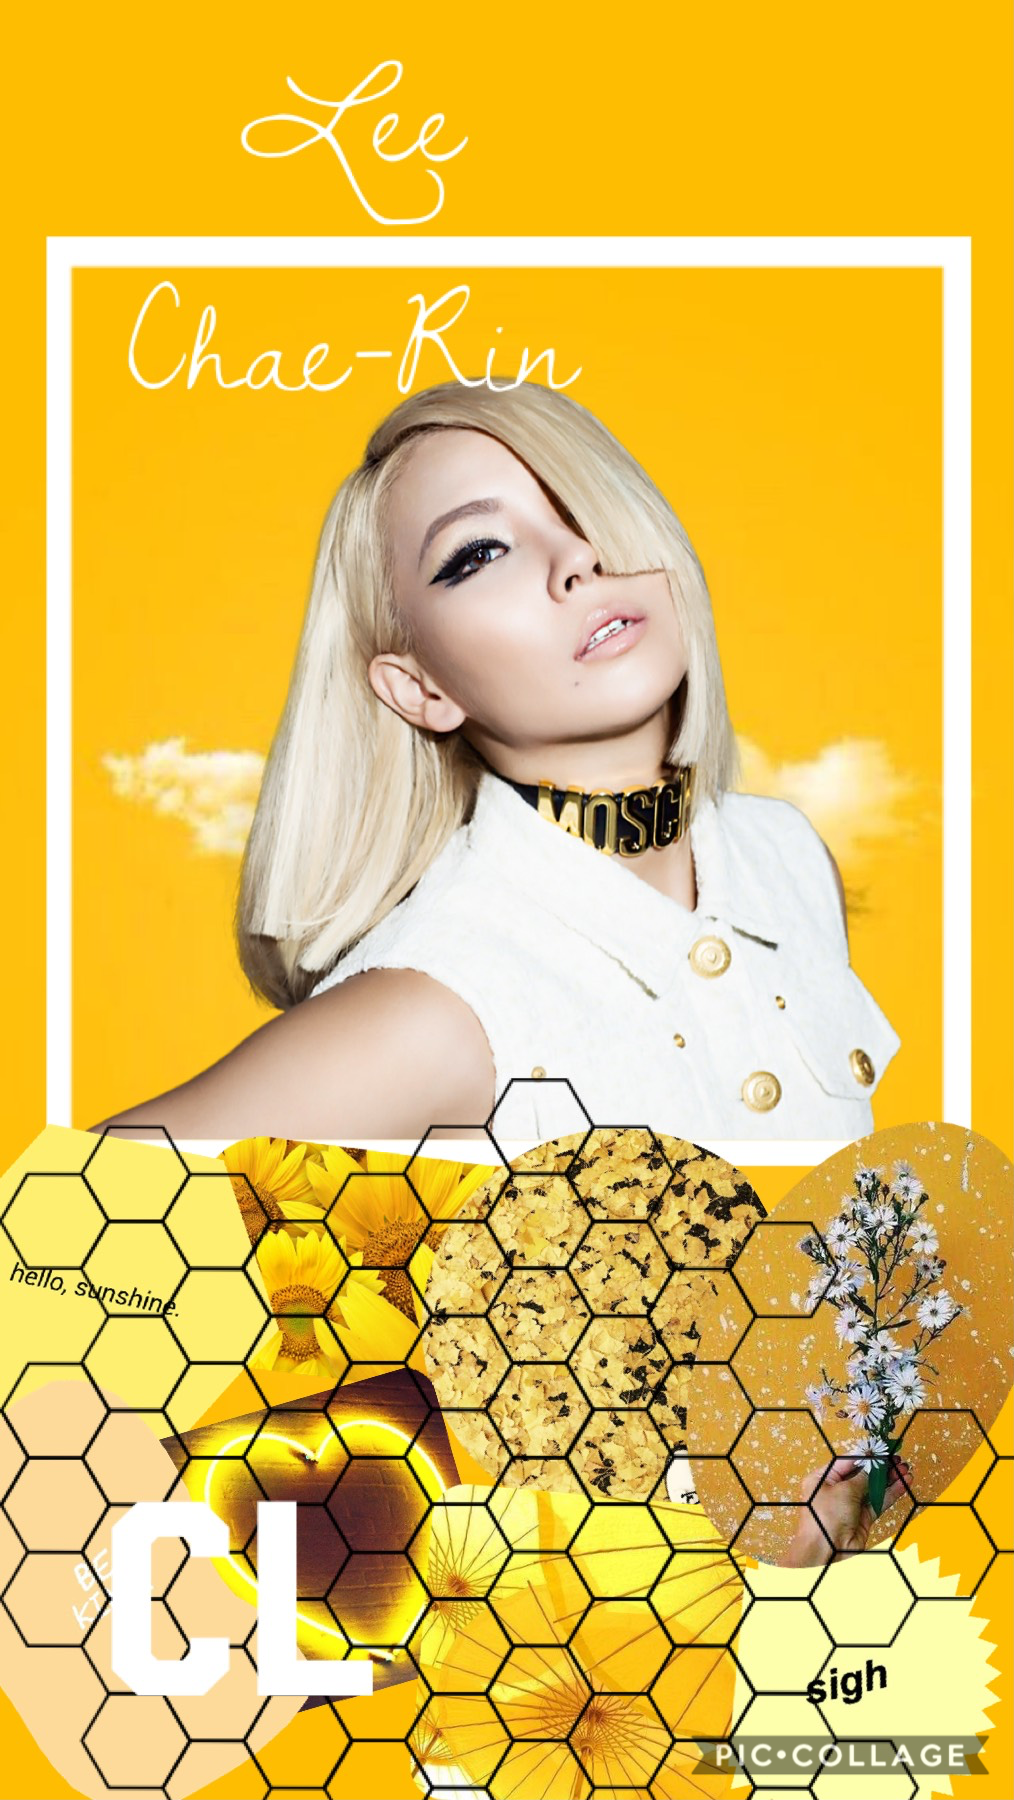 💛CL, a queen (tap)💛 

This edit is trash and shouldn’t exist :)